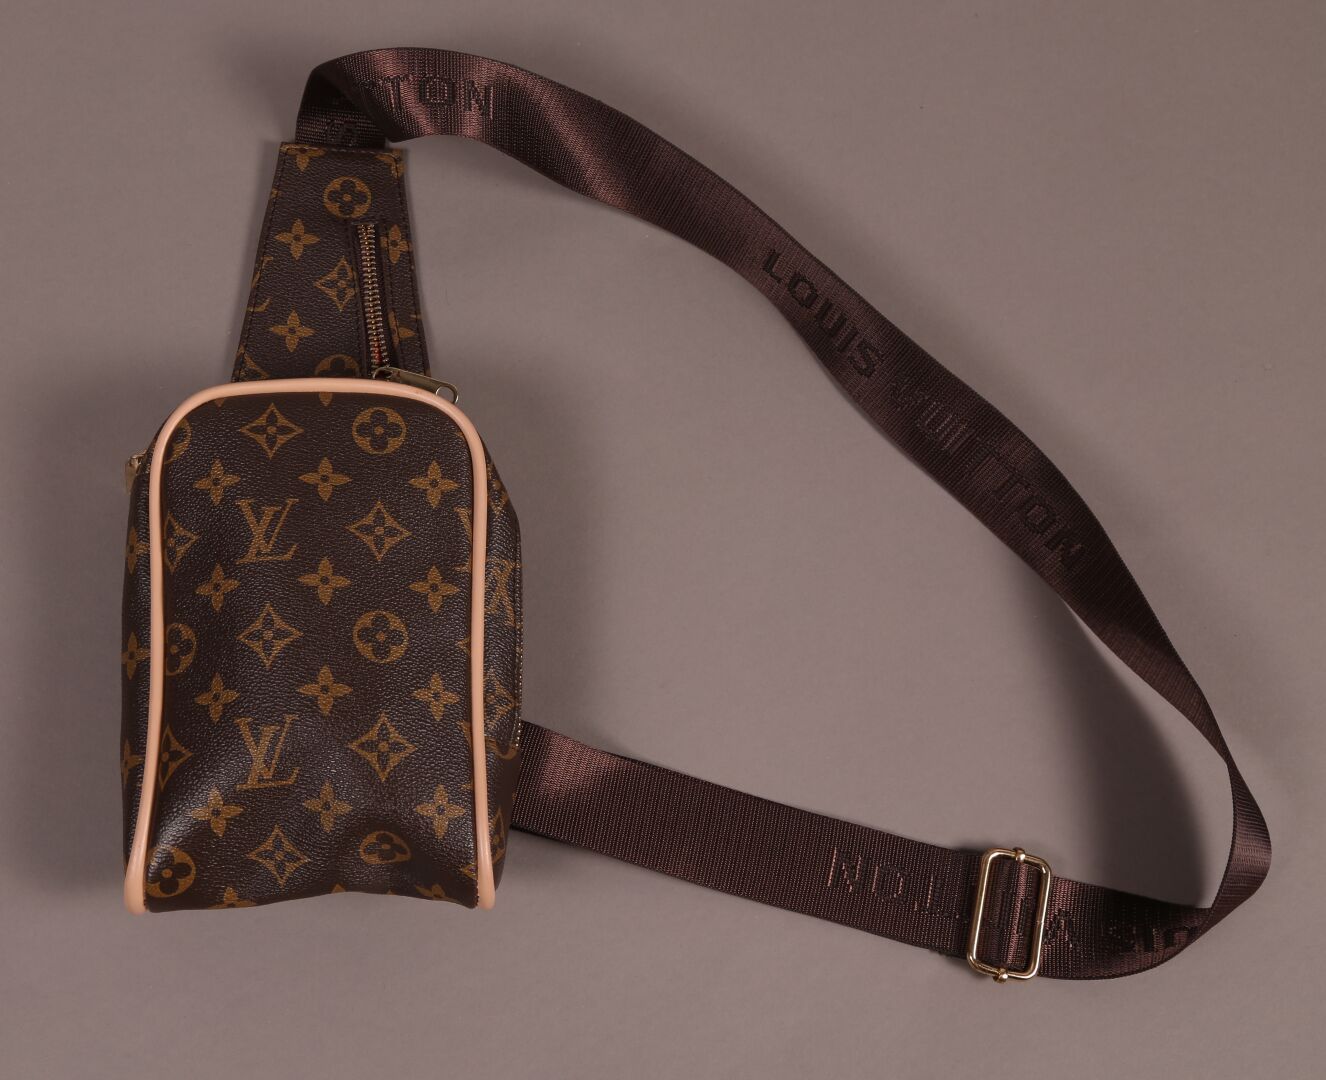 LOUIS VUITTON. Small shoulder bag in Monogram canvas and…